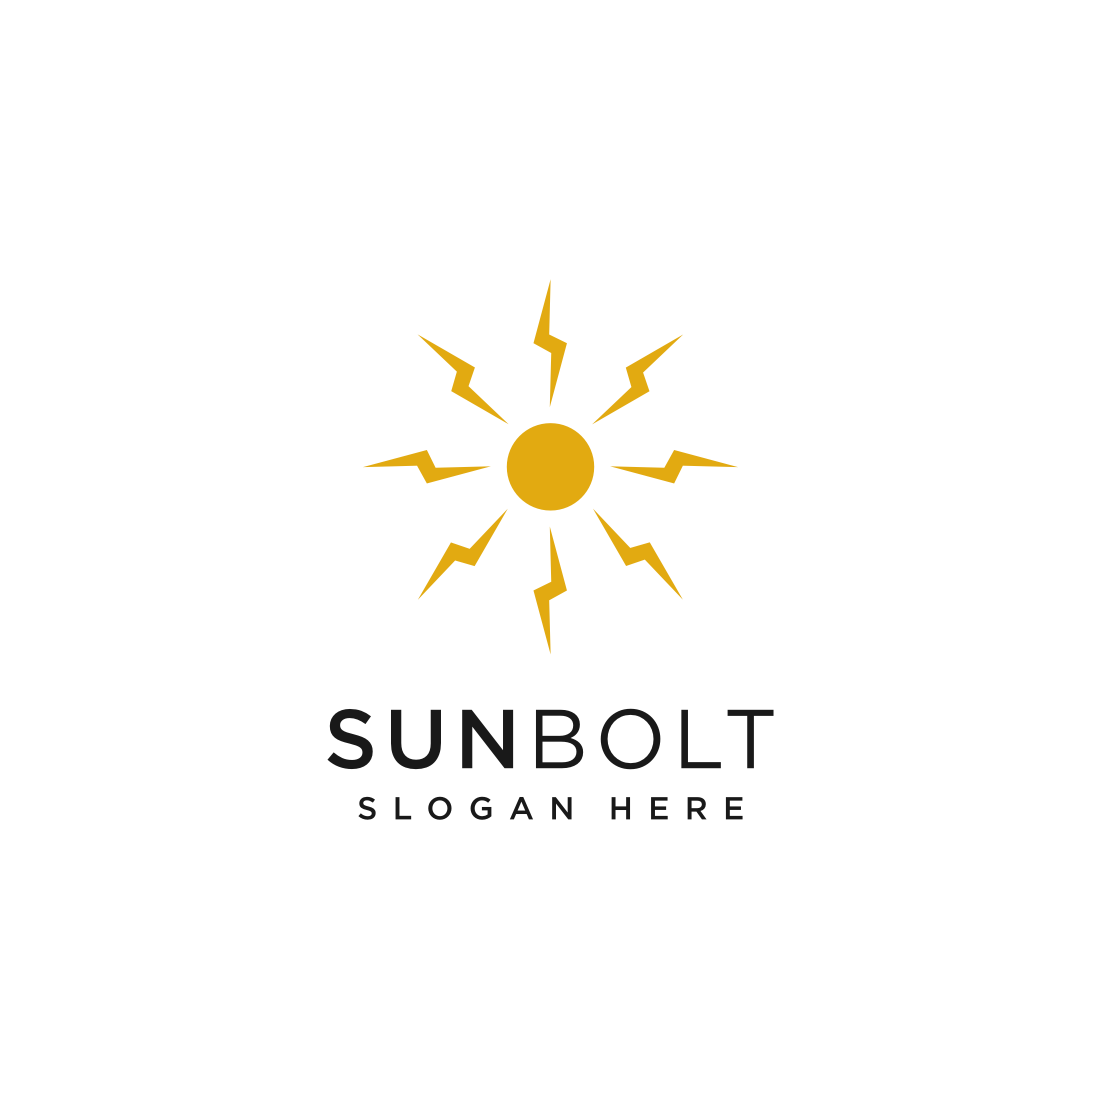 The sun bolt logo is yellow and black.